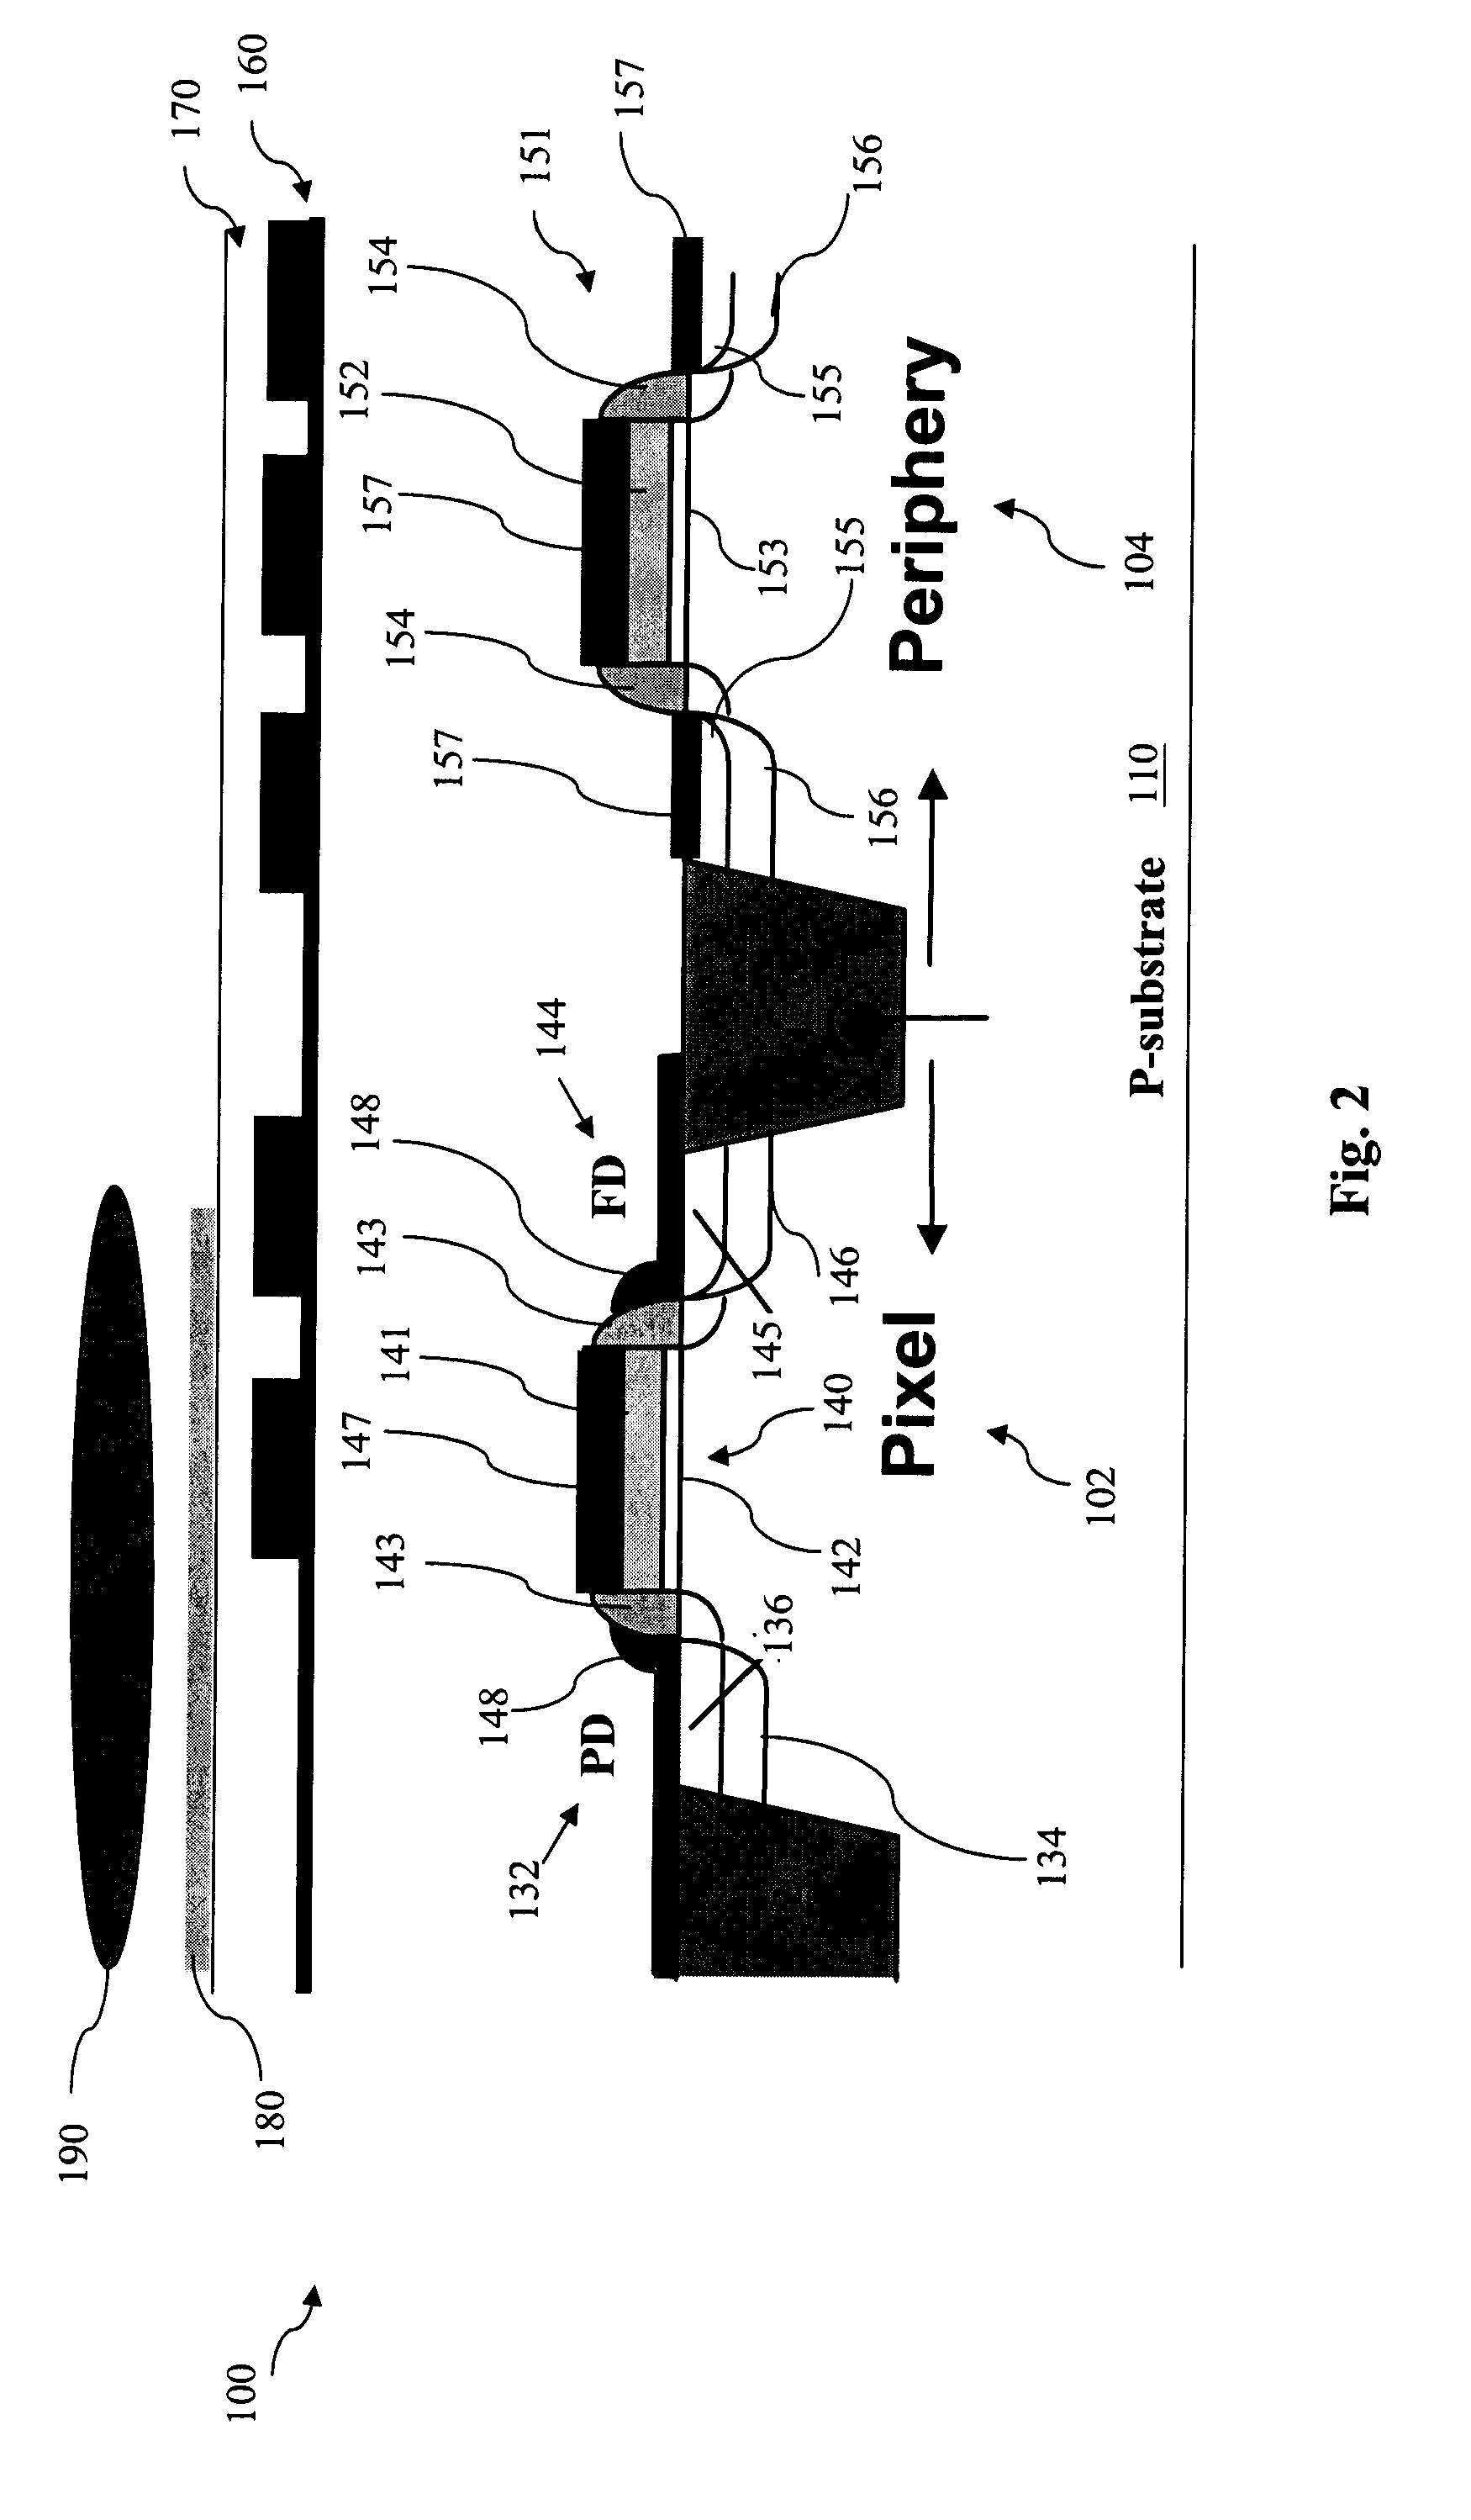 Method and structure to reduce dark current in image sensors